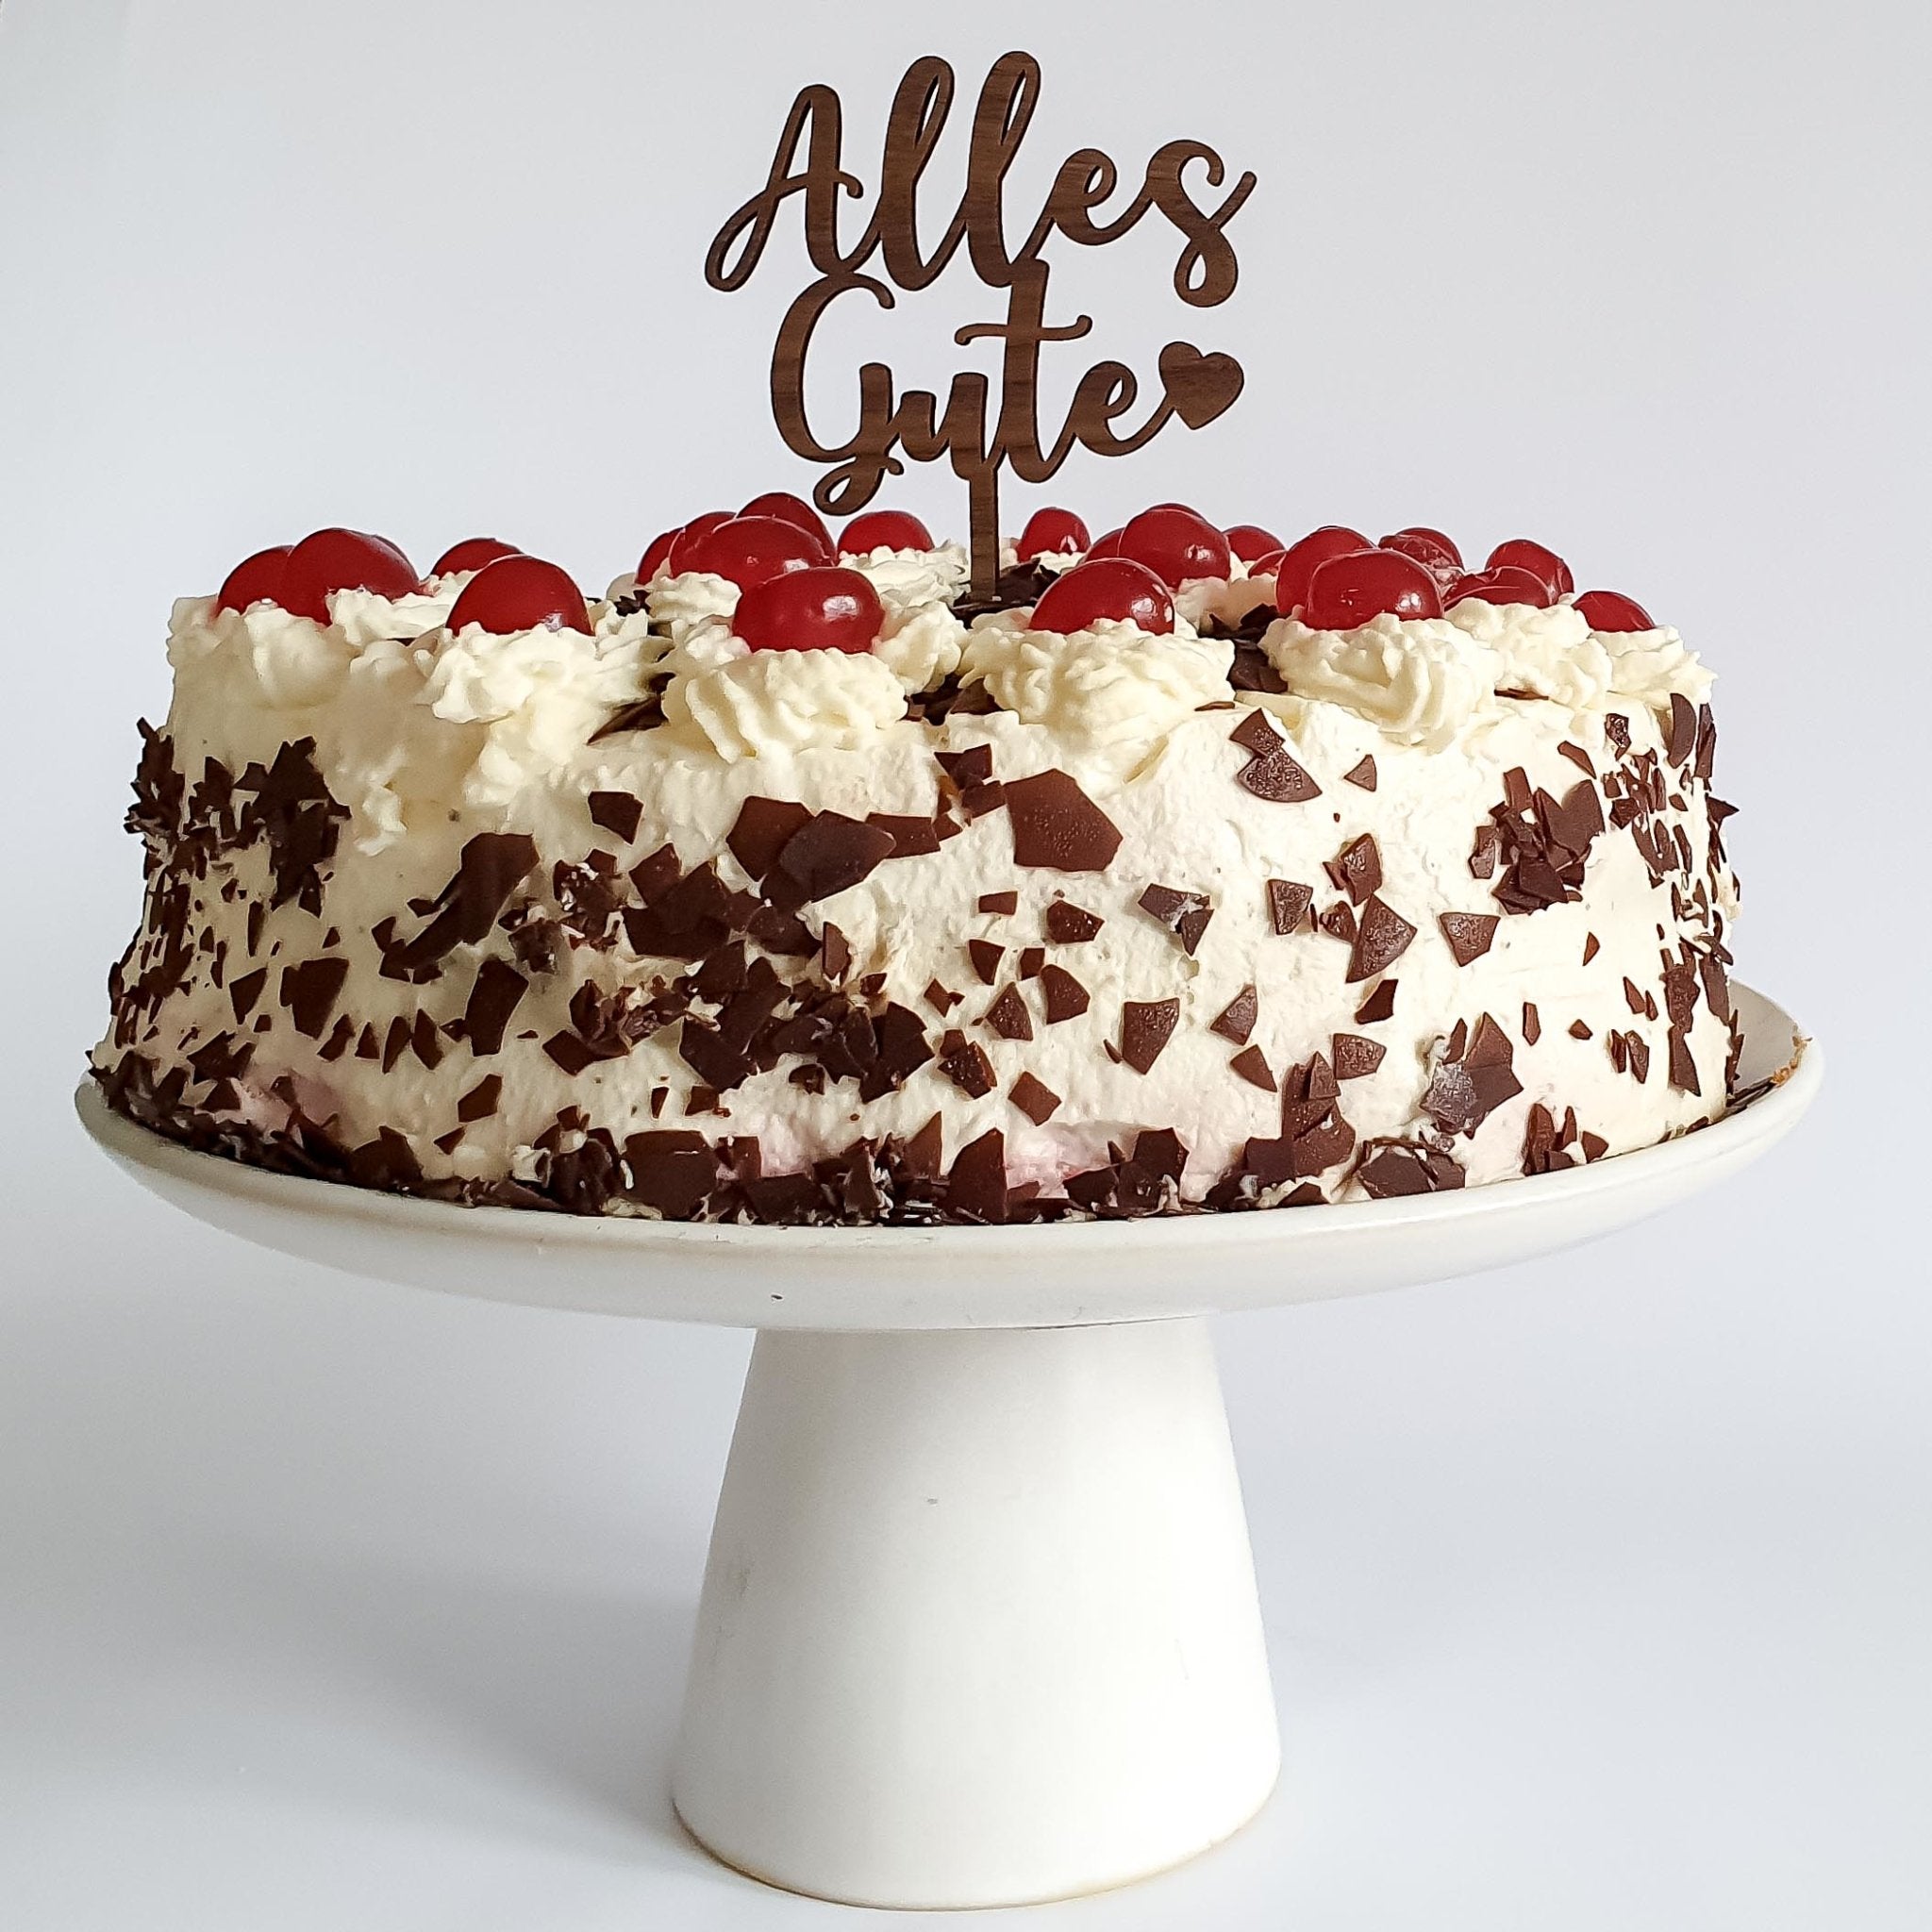 Cake Topper Alles Gute - Suzu Papers